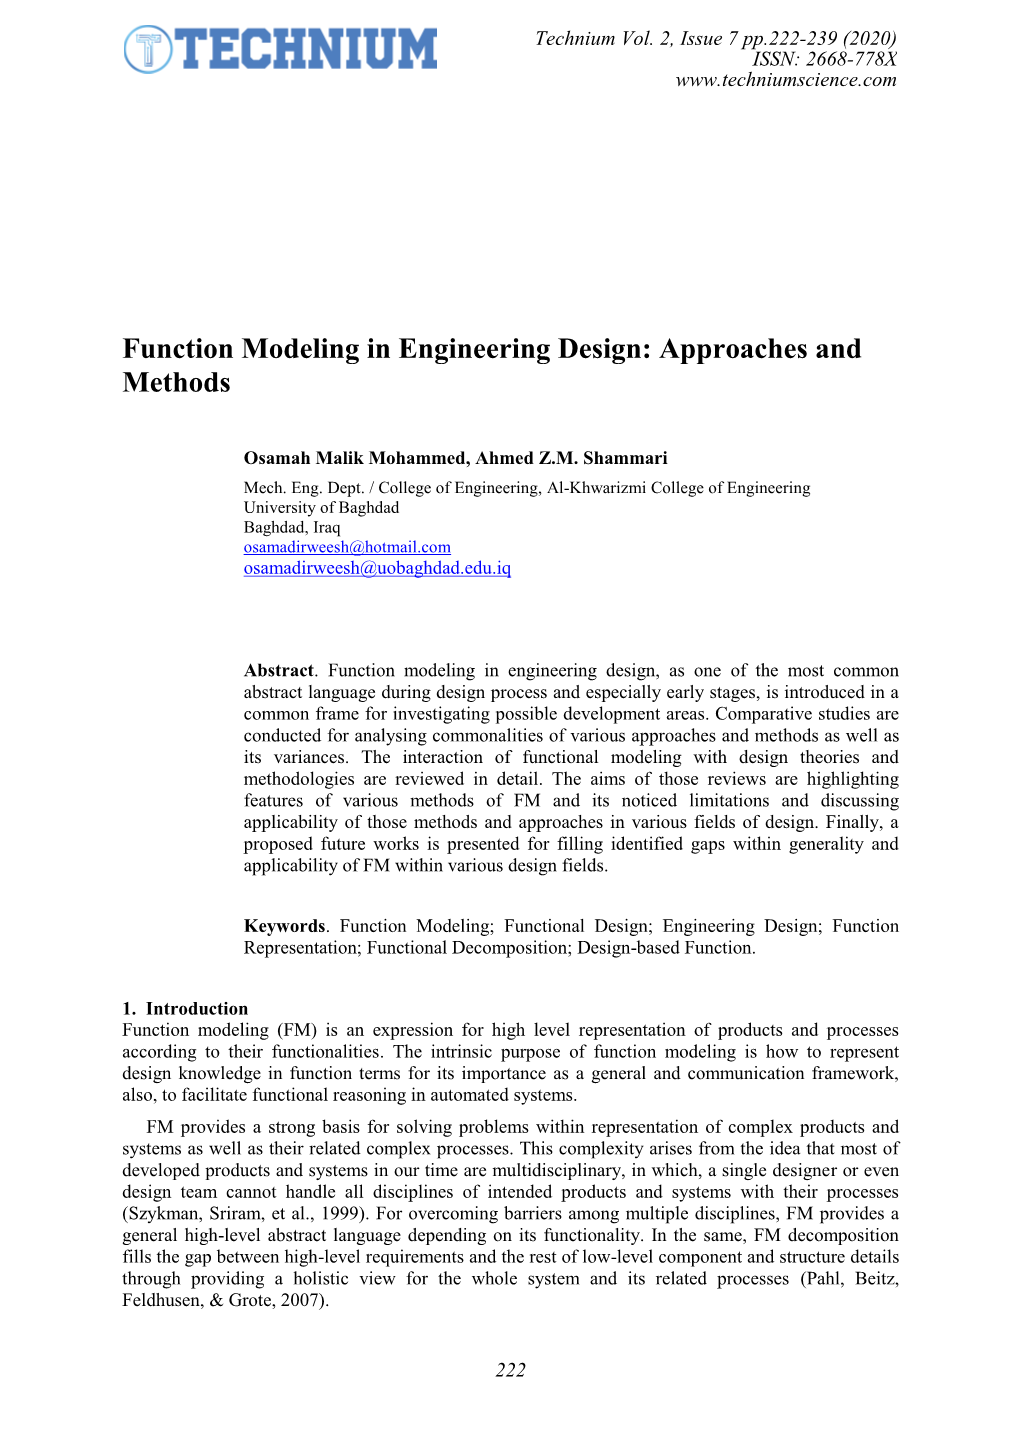 Function Modeling in Engineering Design: Approaches and Methods